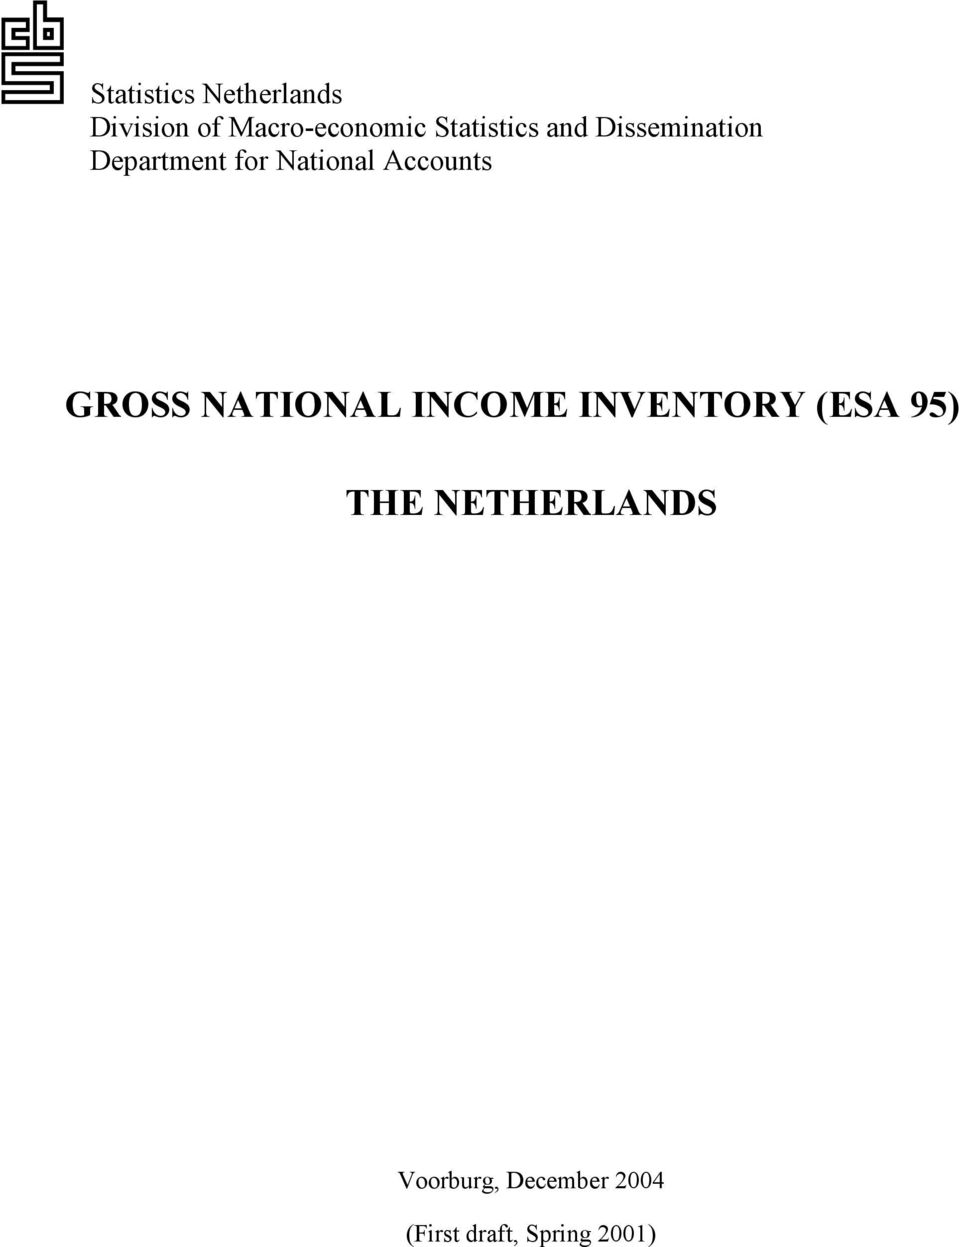 Accounts GROSS NATIONAL INCOME INVENTORY (ESA 95) THE